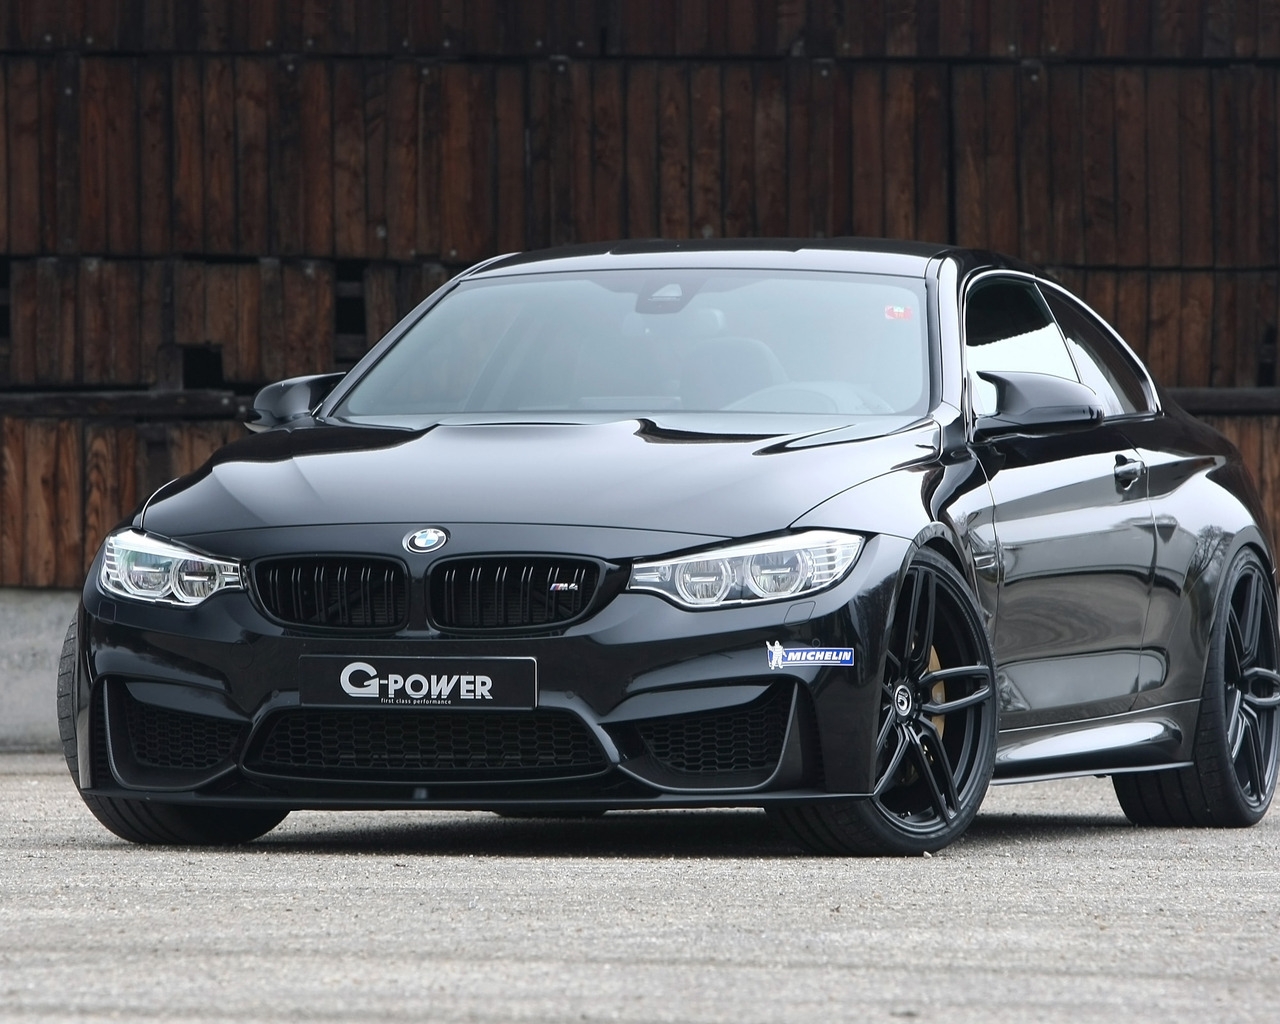 BMW M4 G-Power for 1280 x 1024 resolution